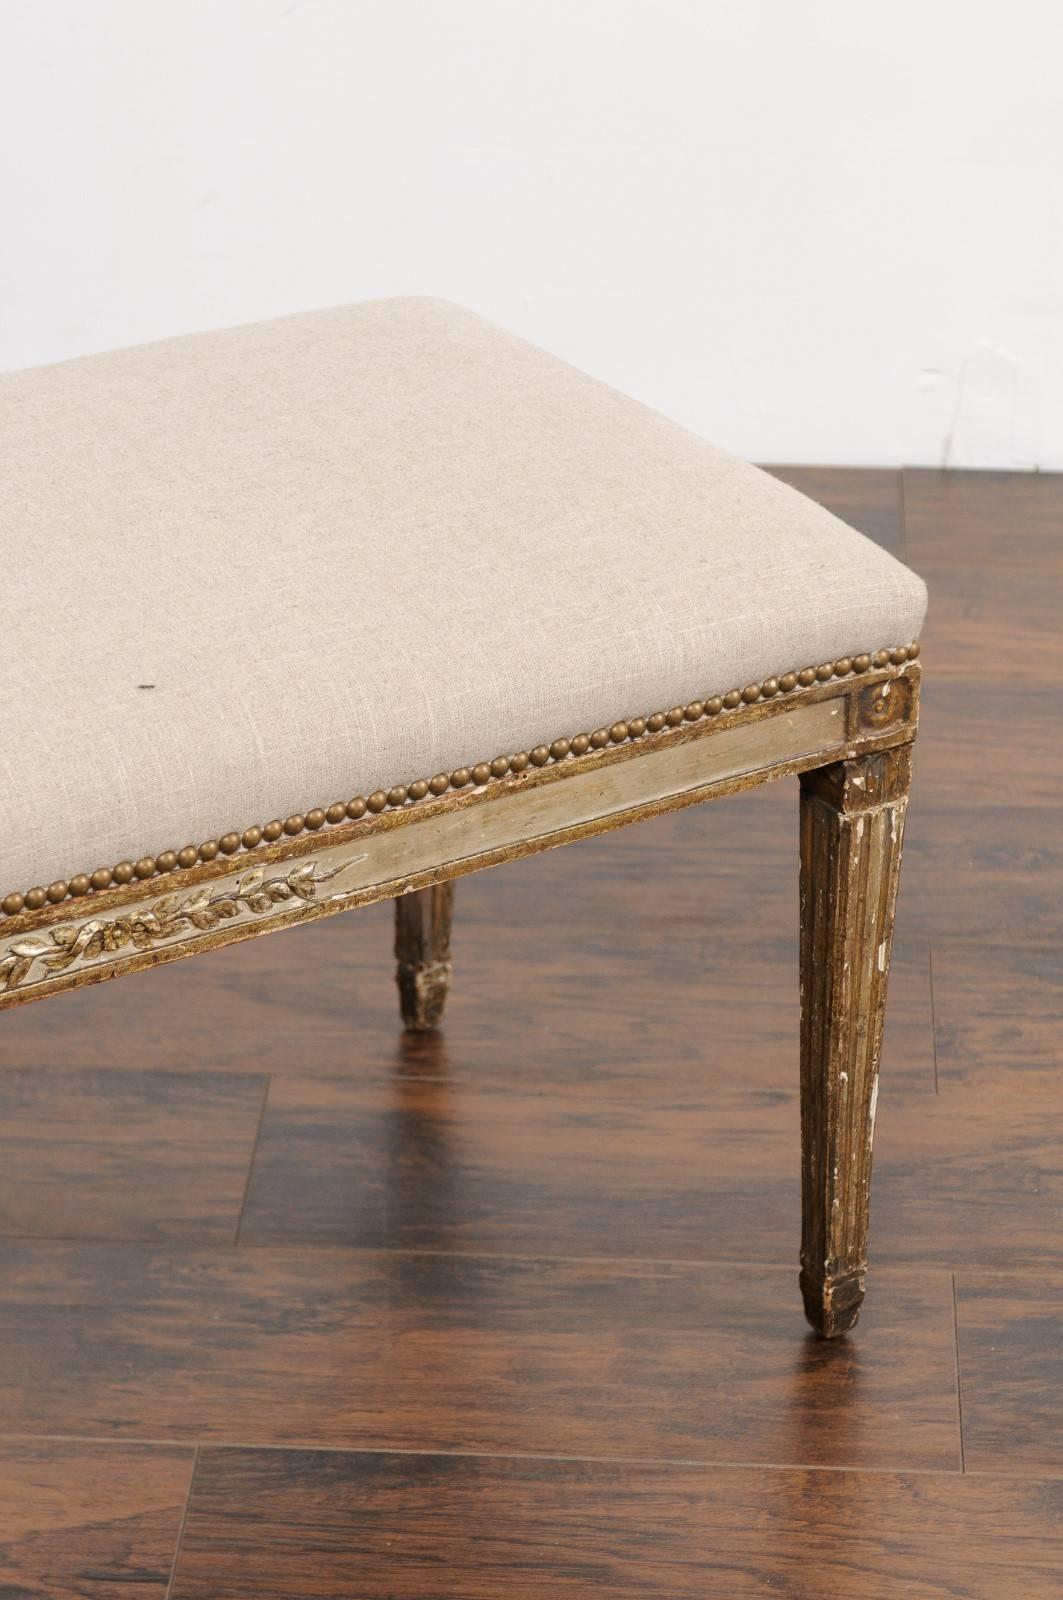 19th Century Neoclassical Period Italian Painted Bench with Tapered Fluted Legs, circa 1810